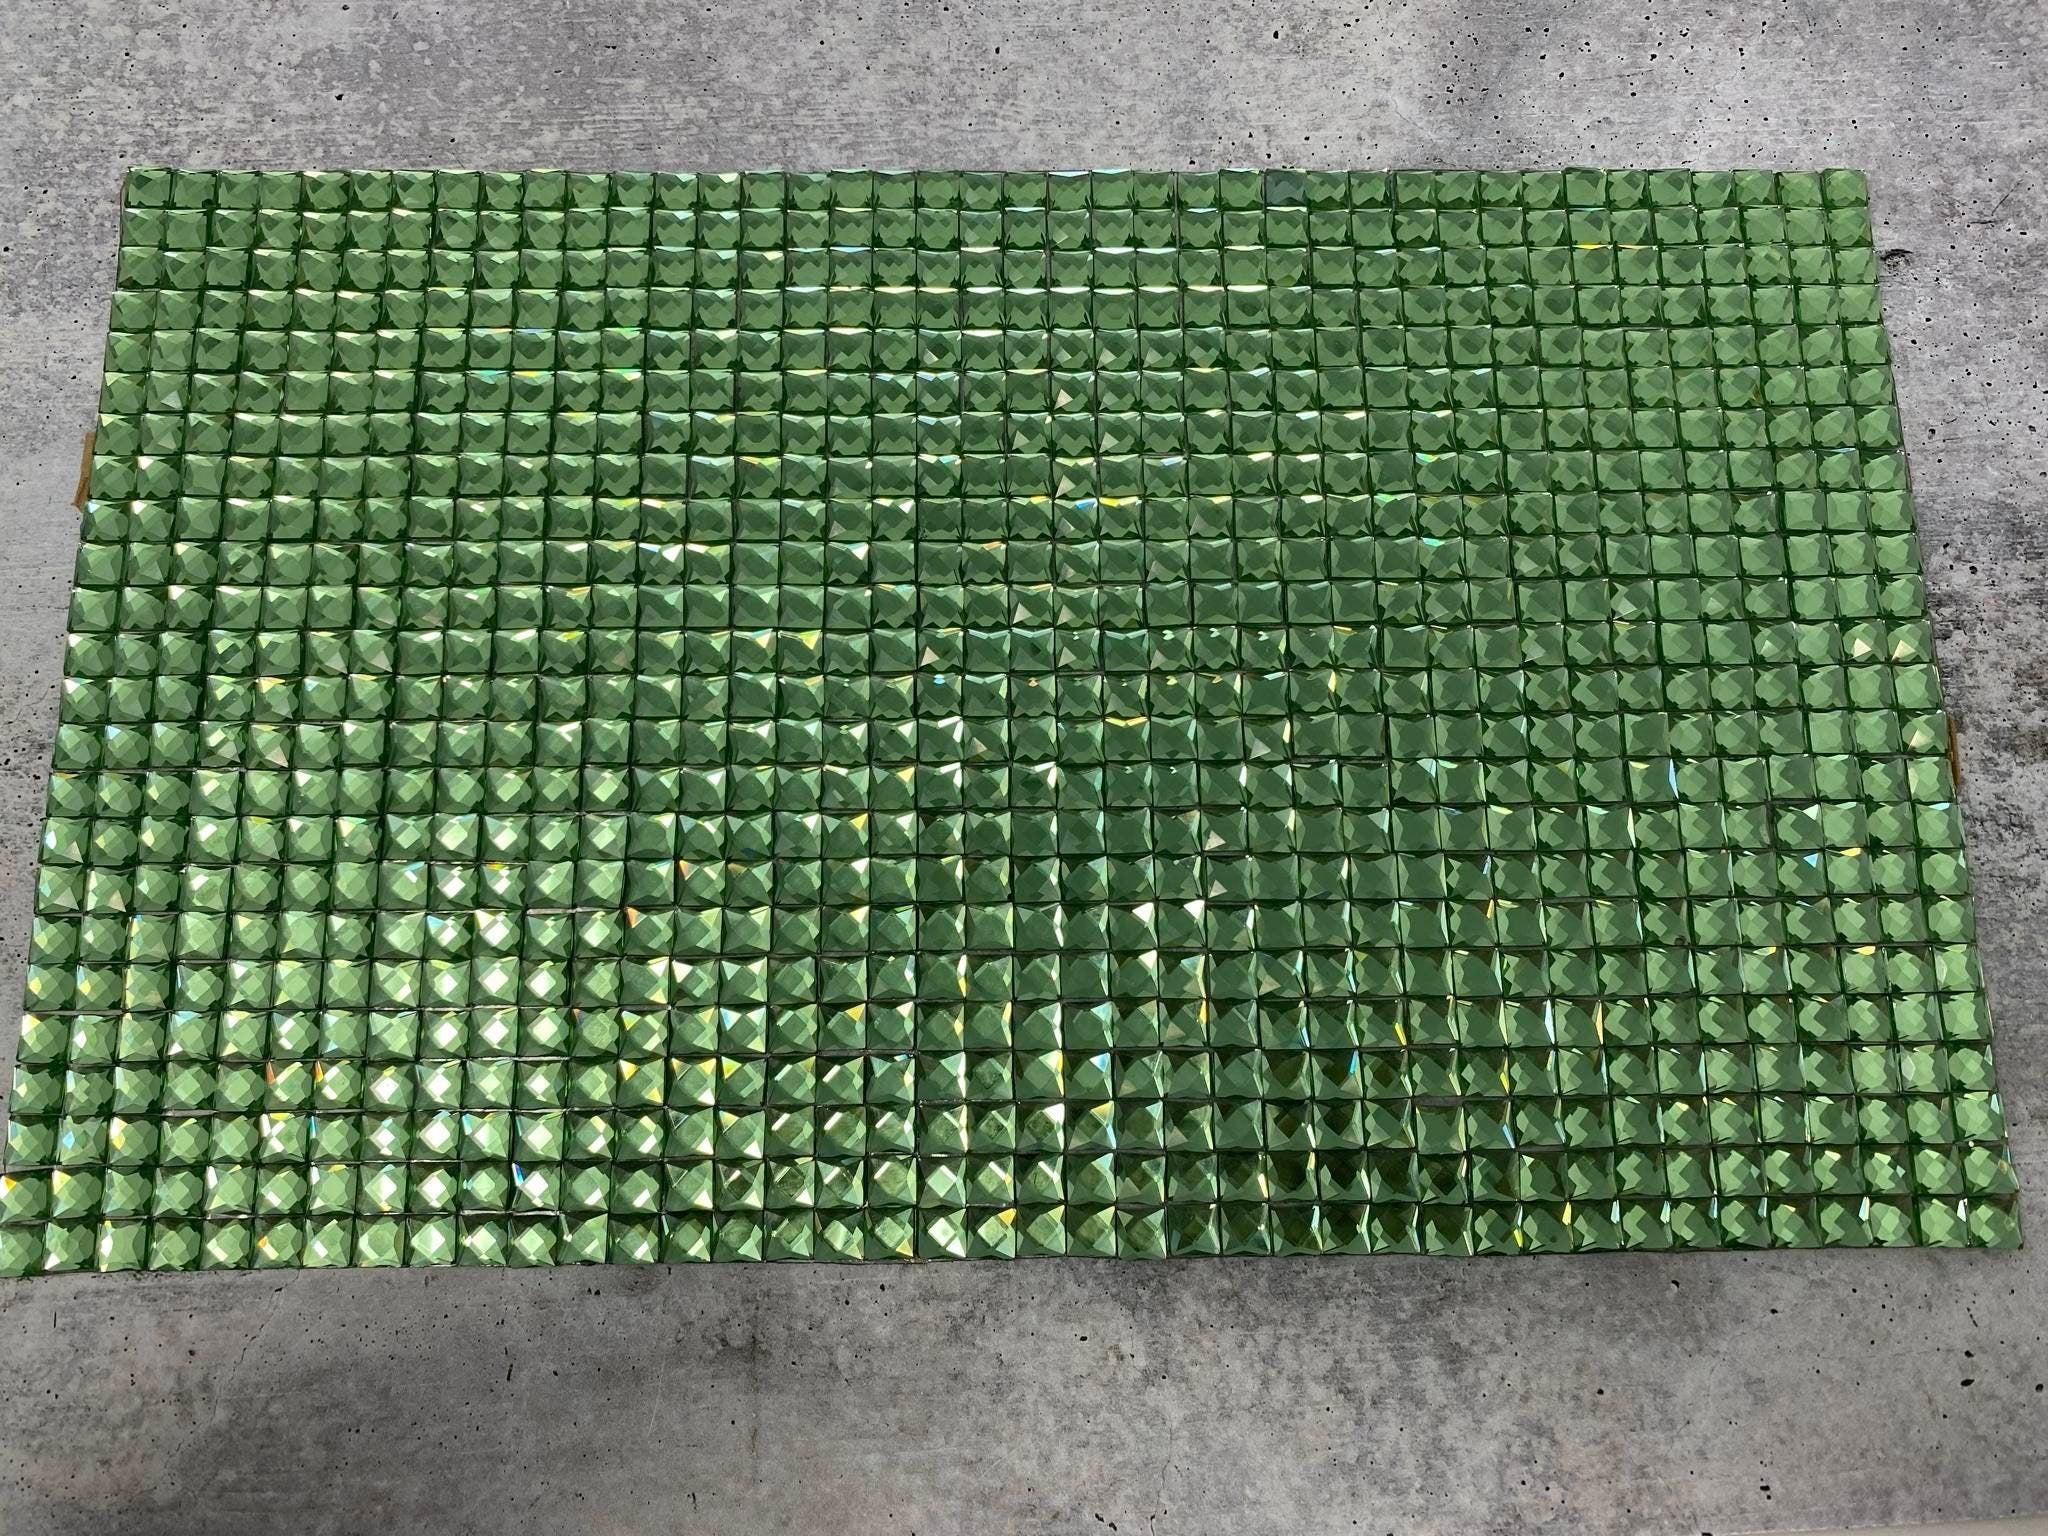 Glass "GREEN" Squares,Hot-fix Rhinestone Sheet for Blinging Clothes, Shoes, Handbags, Wine Glasses & More, 10" x 16.5" sz, 135 Squares